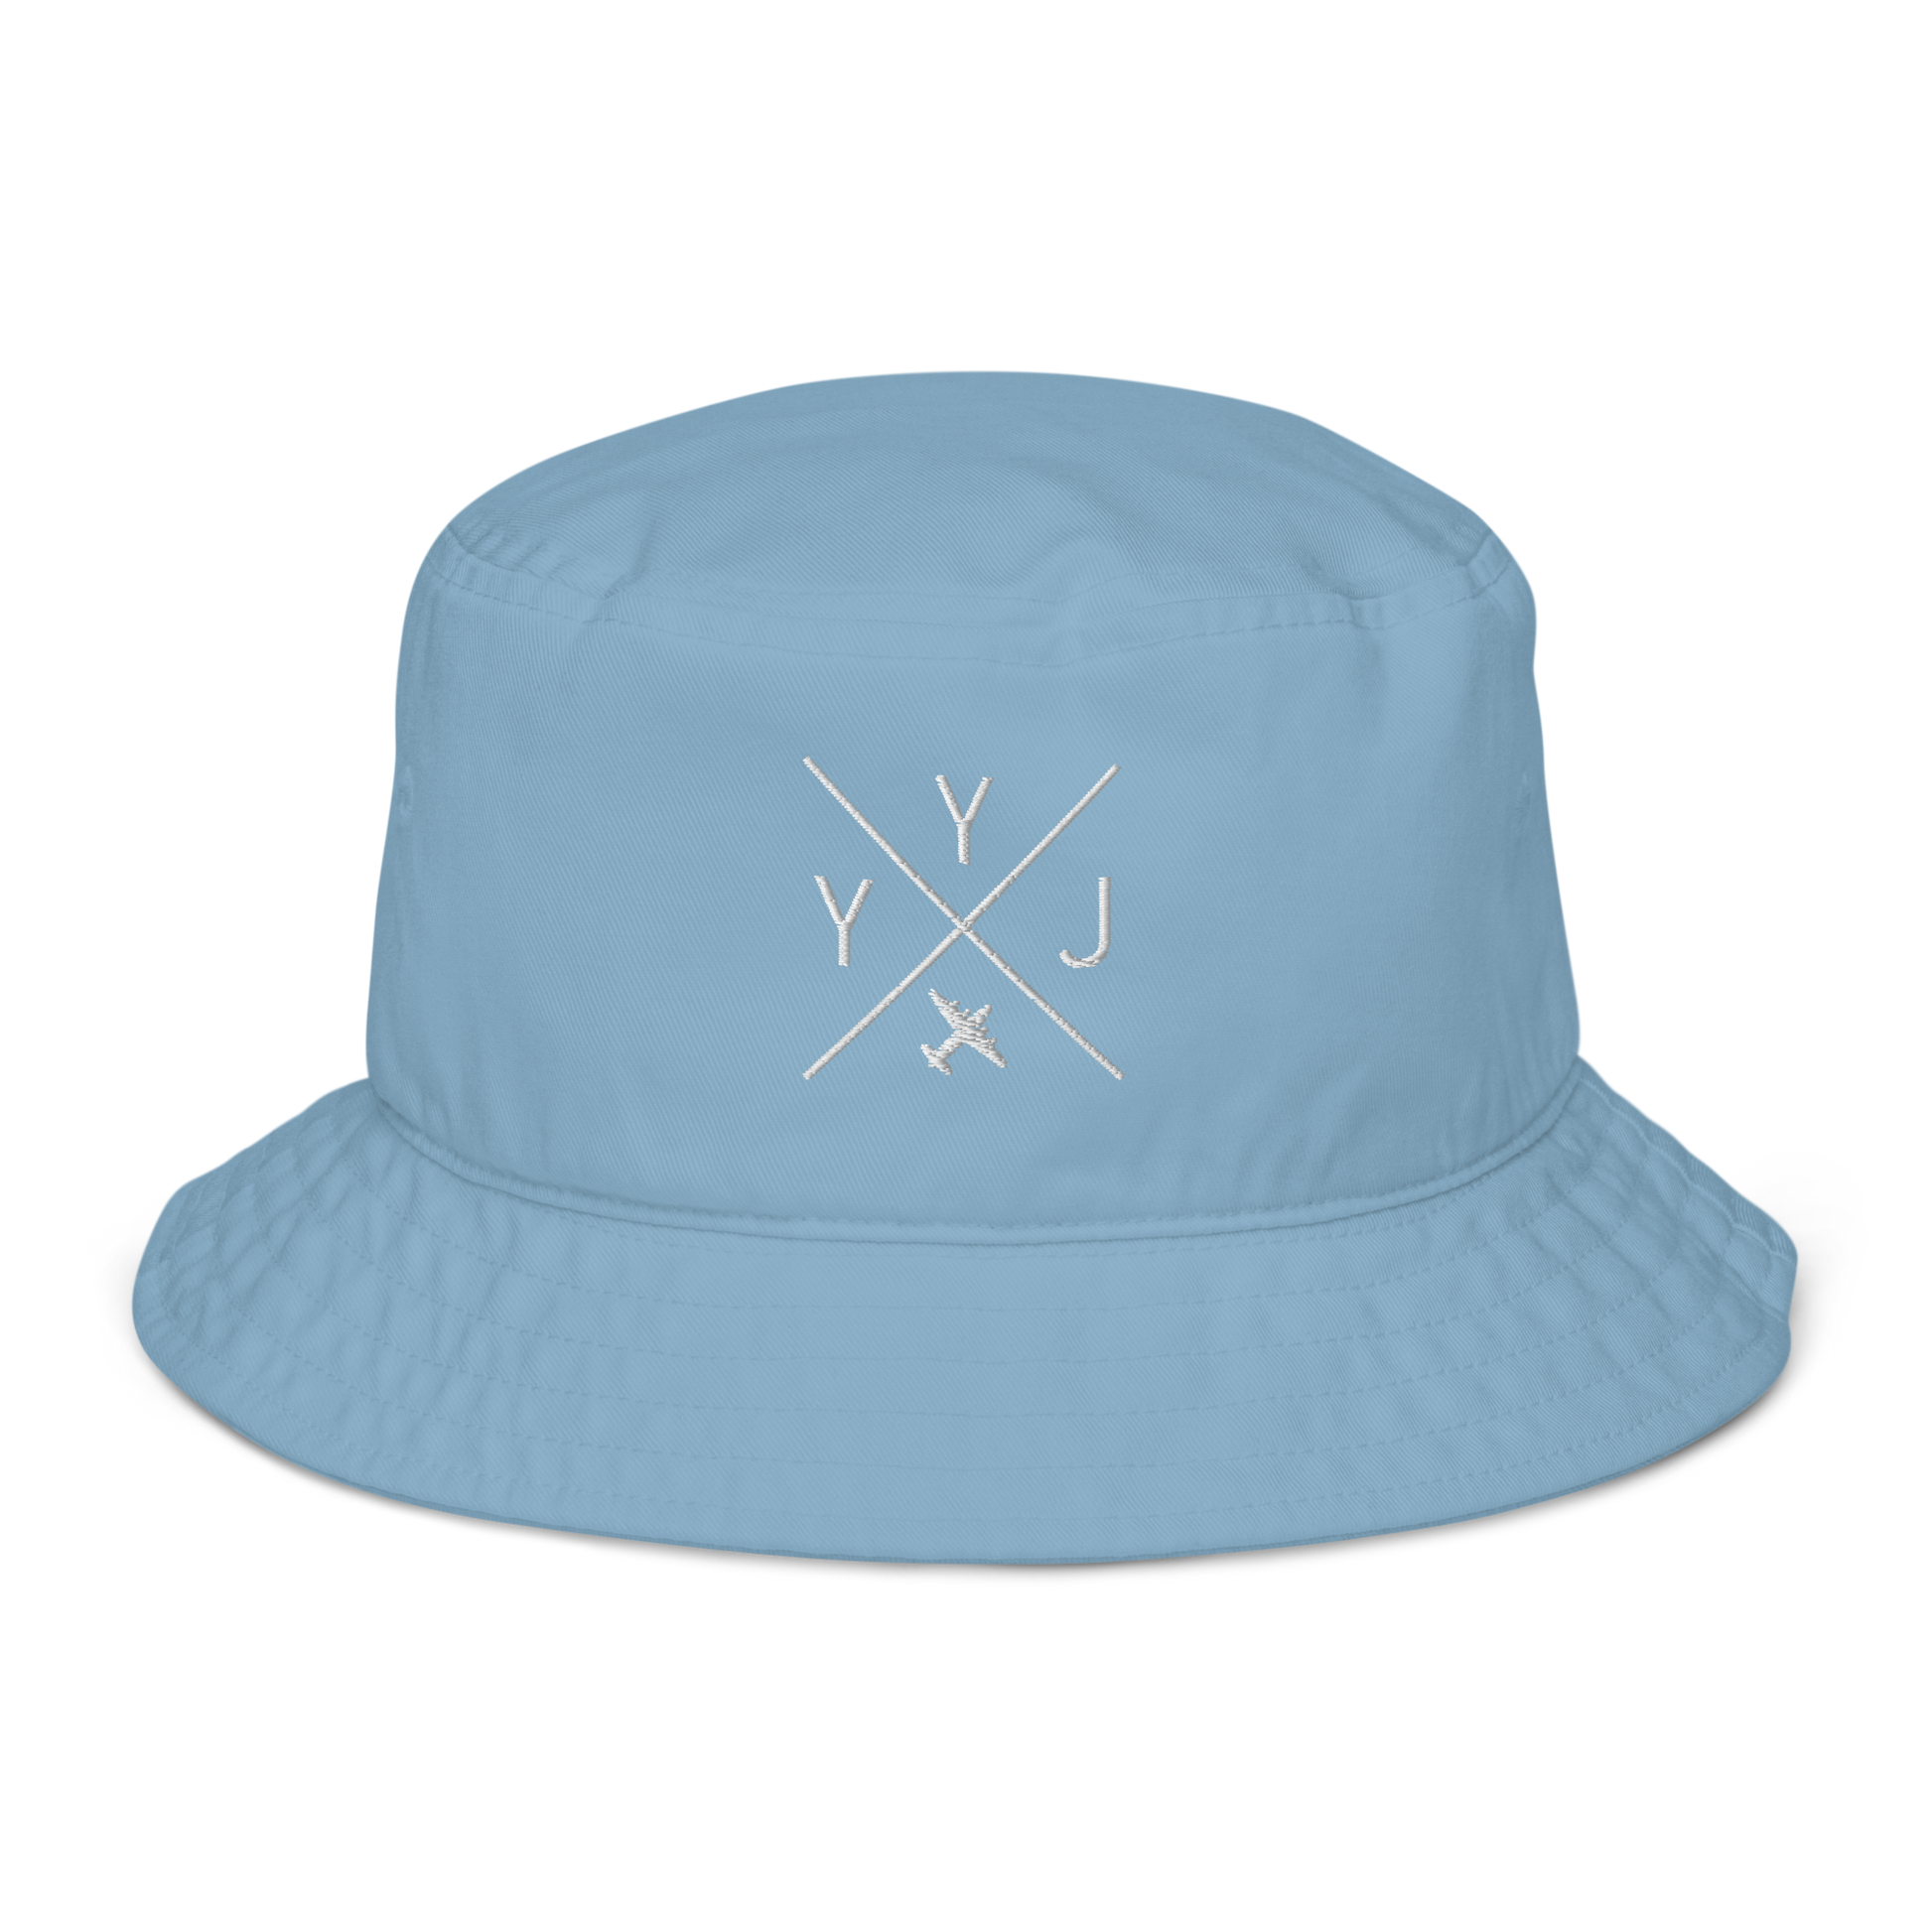 YHM Designs - YYJ Victoria Organic Cotton Bucket Hat - Crossed-X Design with Airport Code and Vintage Propliner - White Embroidery - Image 07